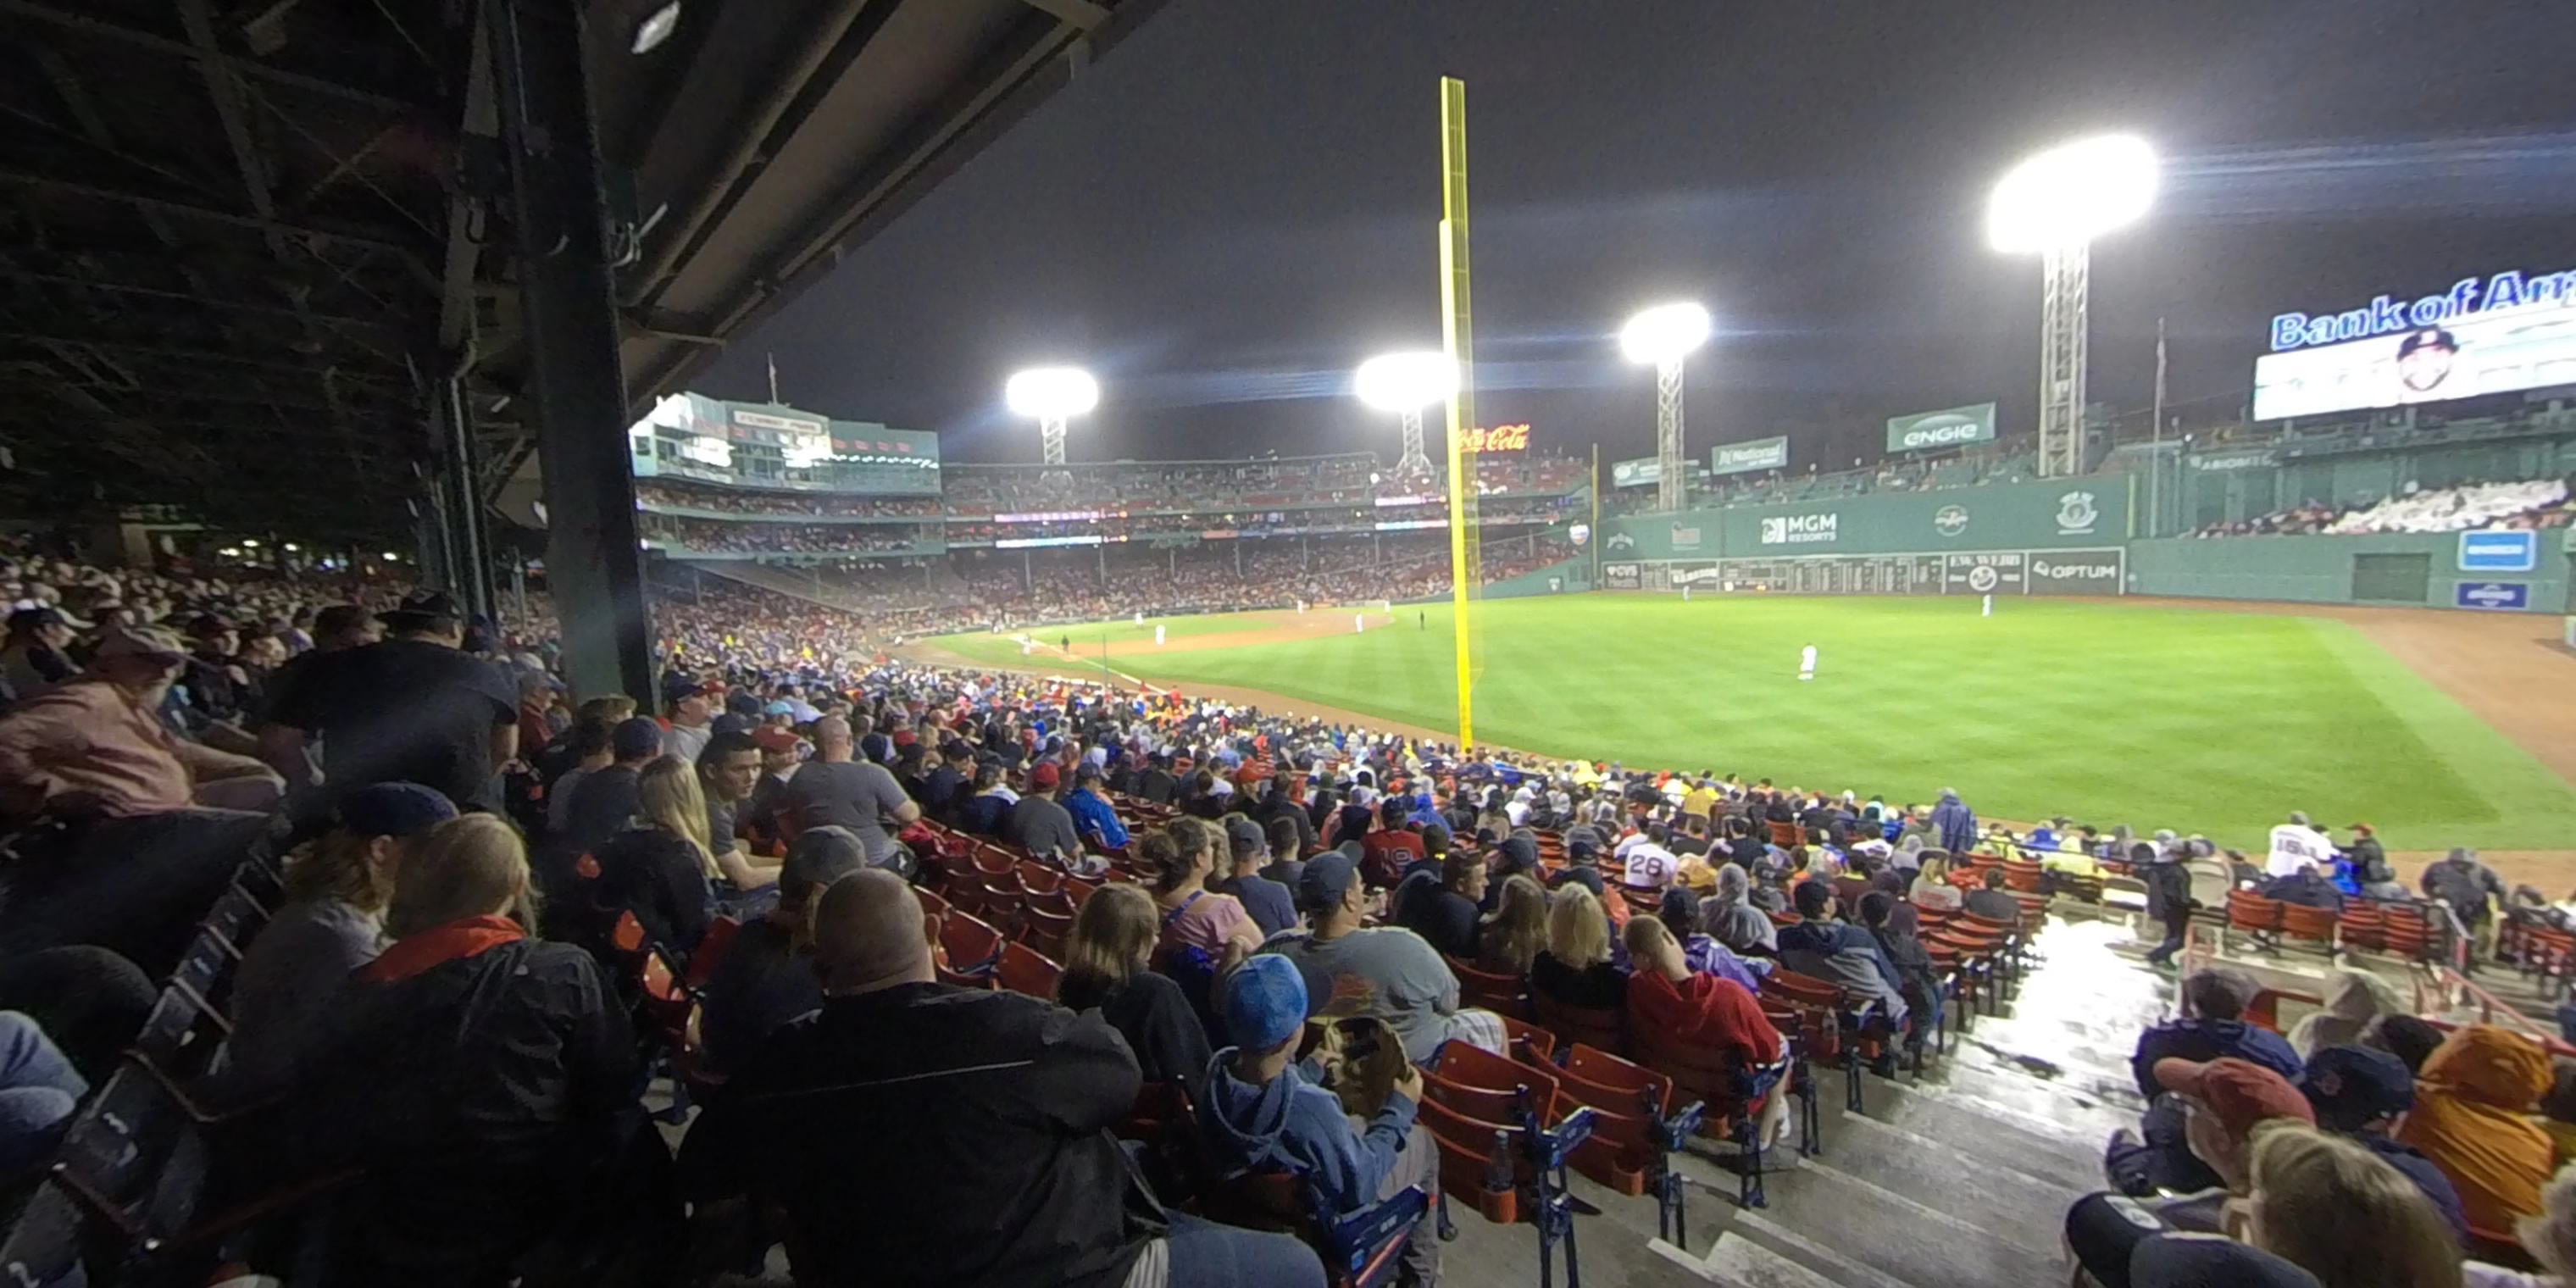 grandstand 6 panoramic seat view  for baseball - fenway park